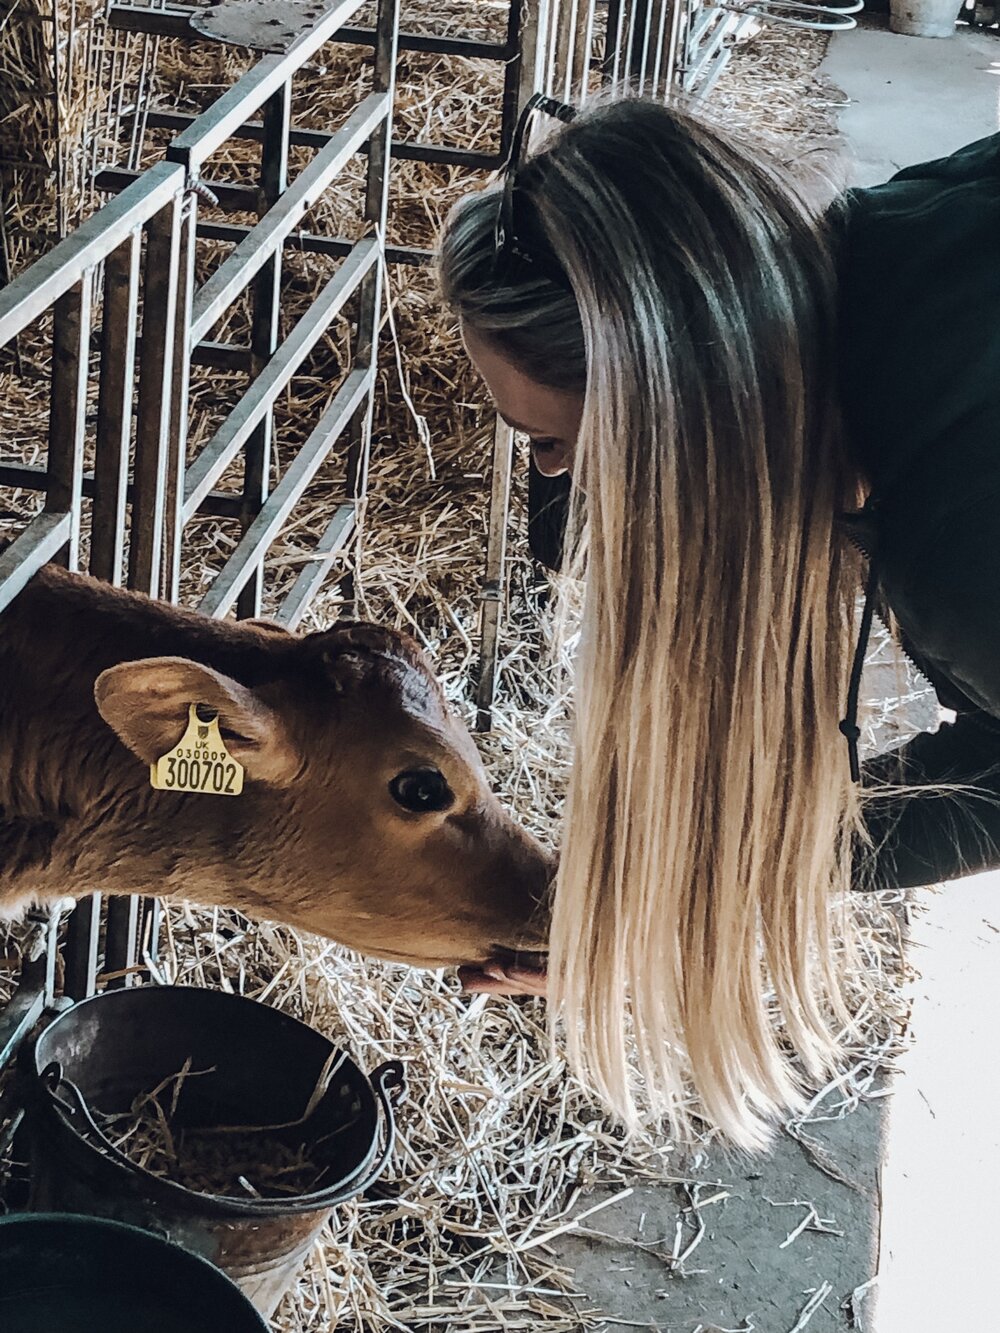 Petting a baby Jersey cow